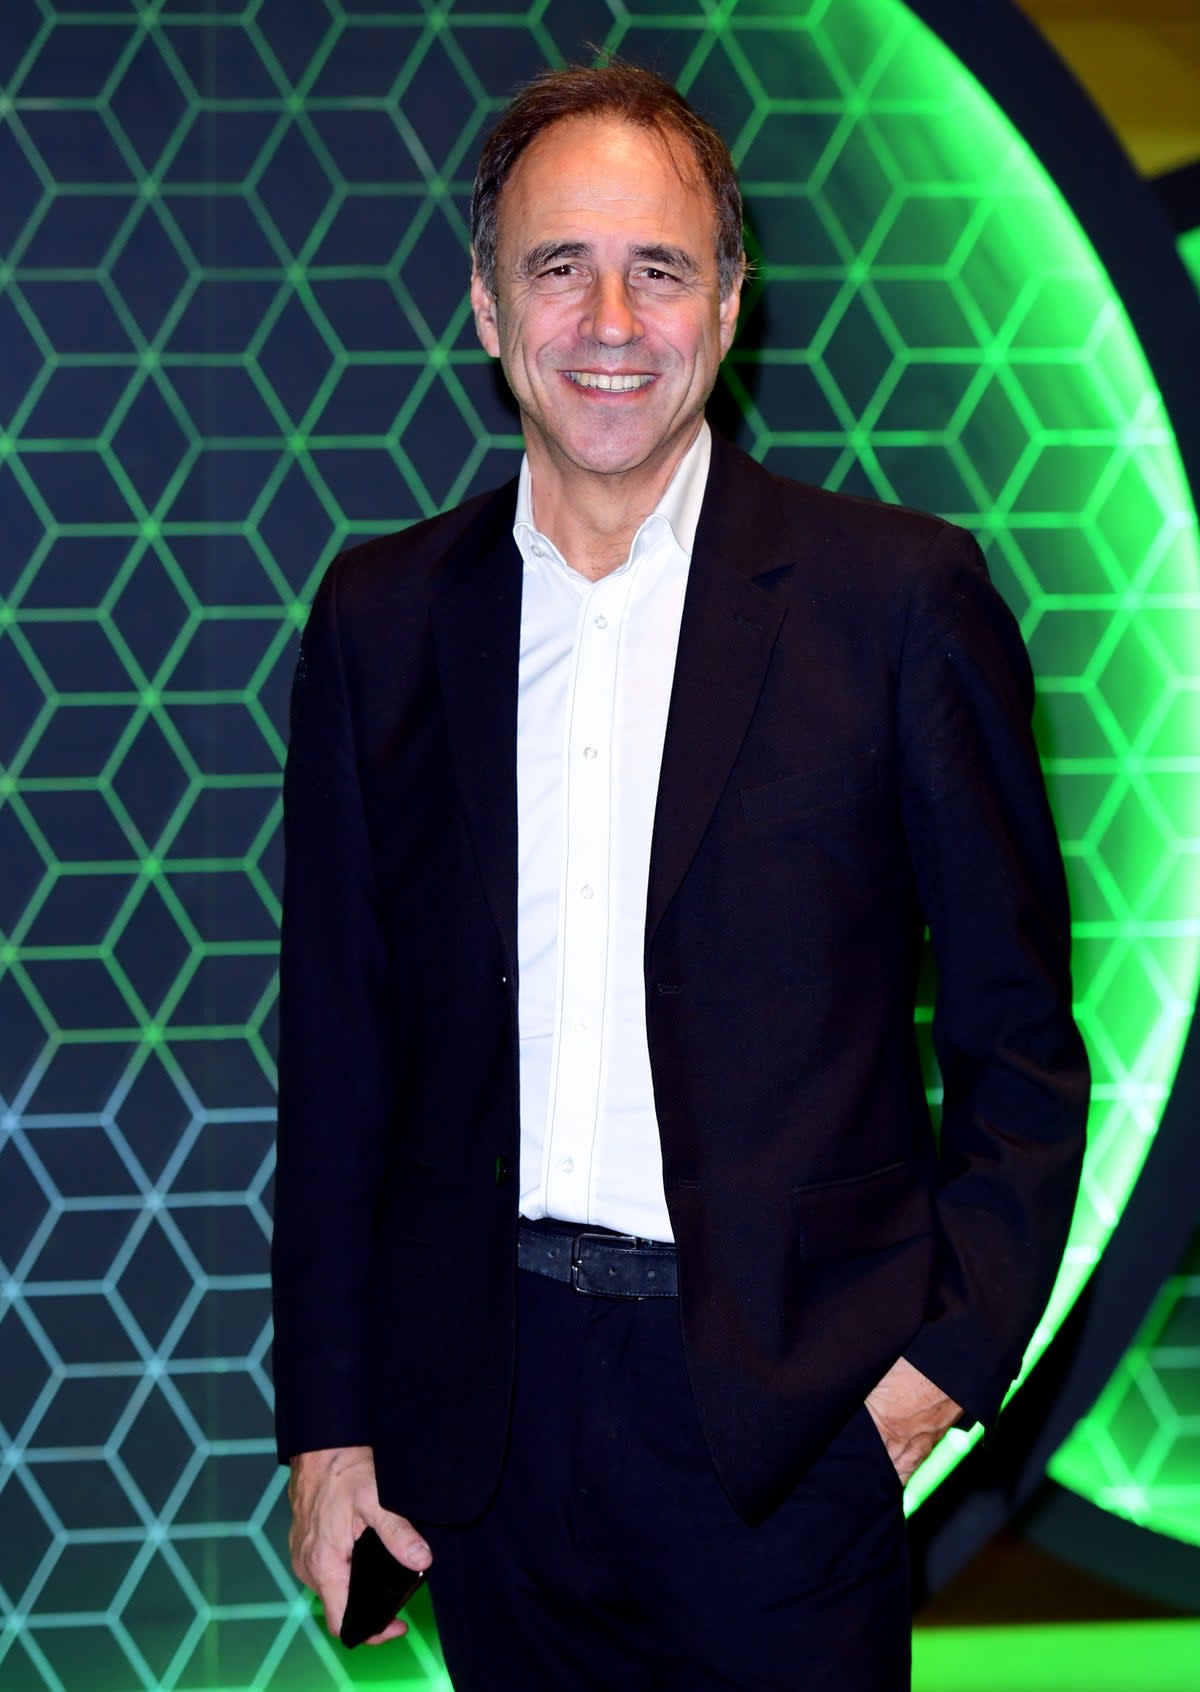 Anthony Horowitz attending the first Bloomberg Philanthropies and Vanity Fair Climate Exchange Gala Dinner held at Bloomberg’s London HQ (PA Archive)